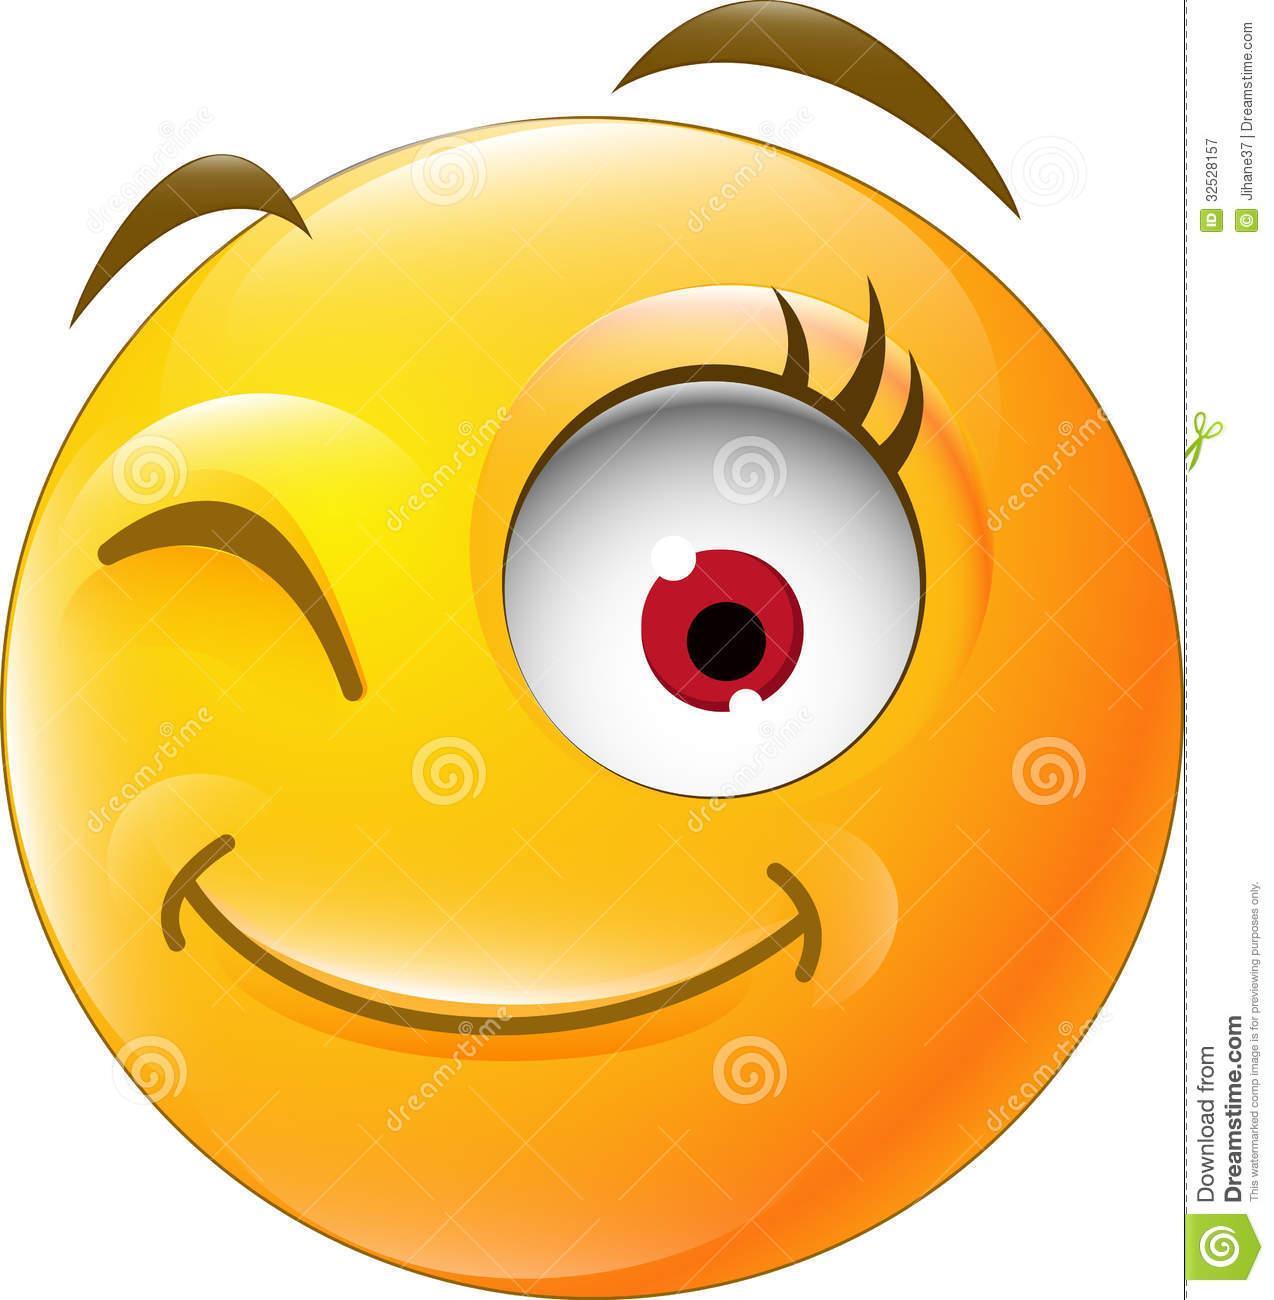 Eye Blinking For You Design Royalty Free Stock Photography   Image